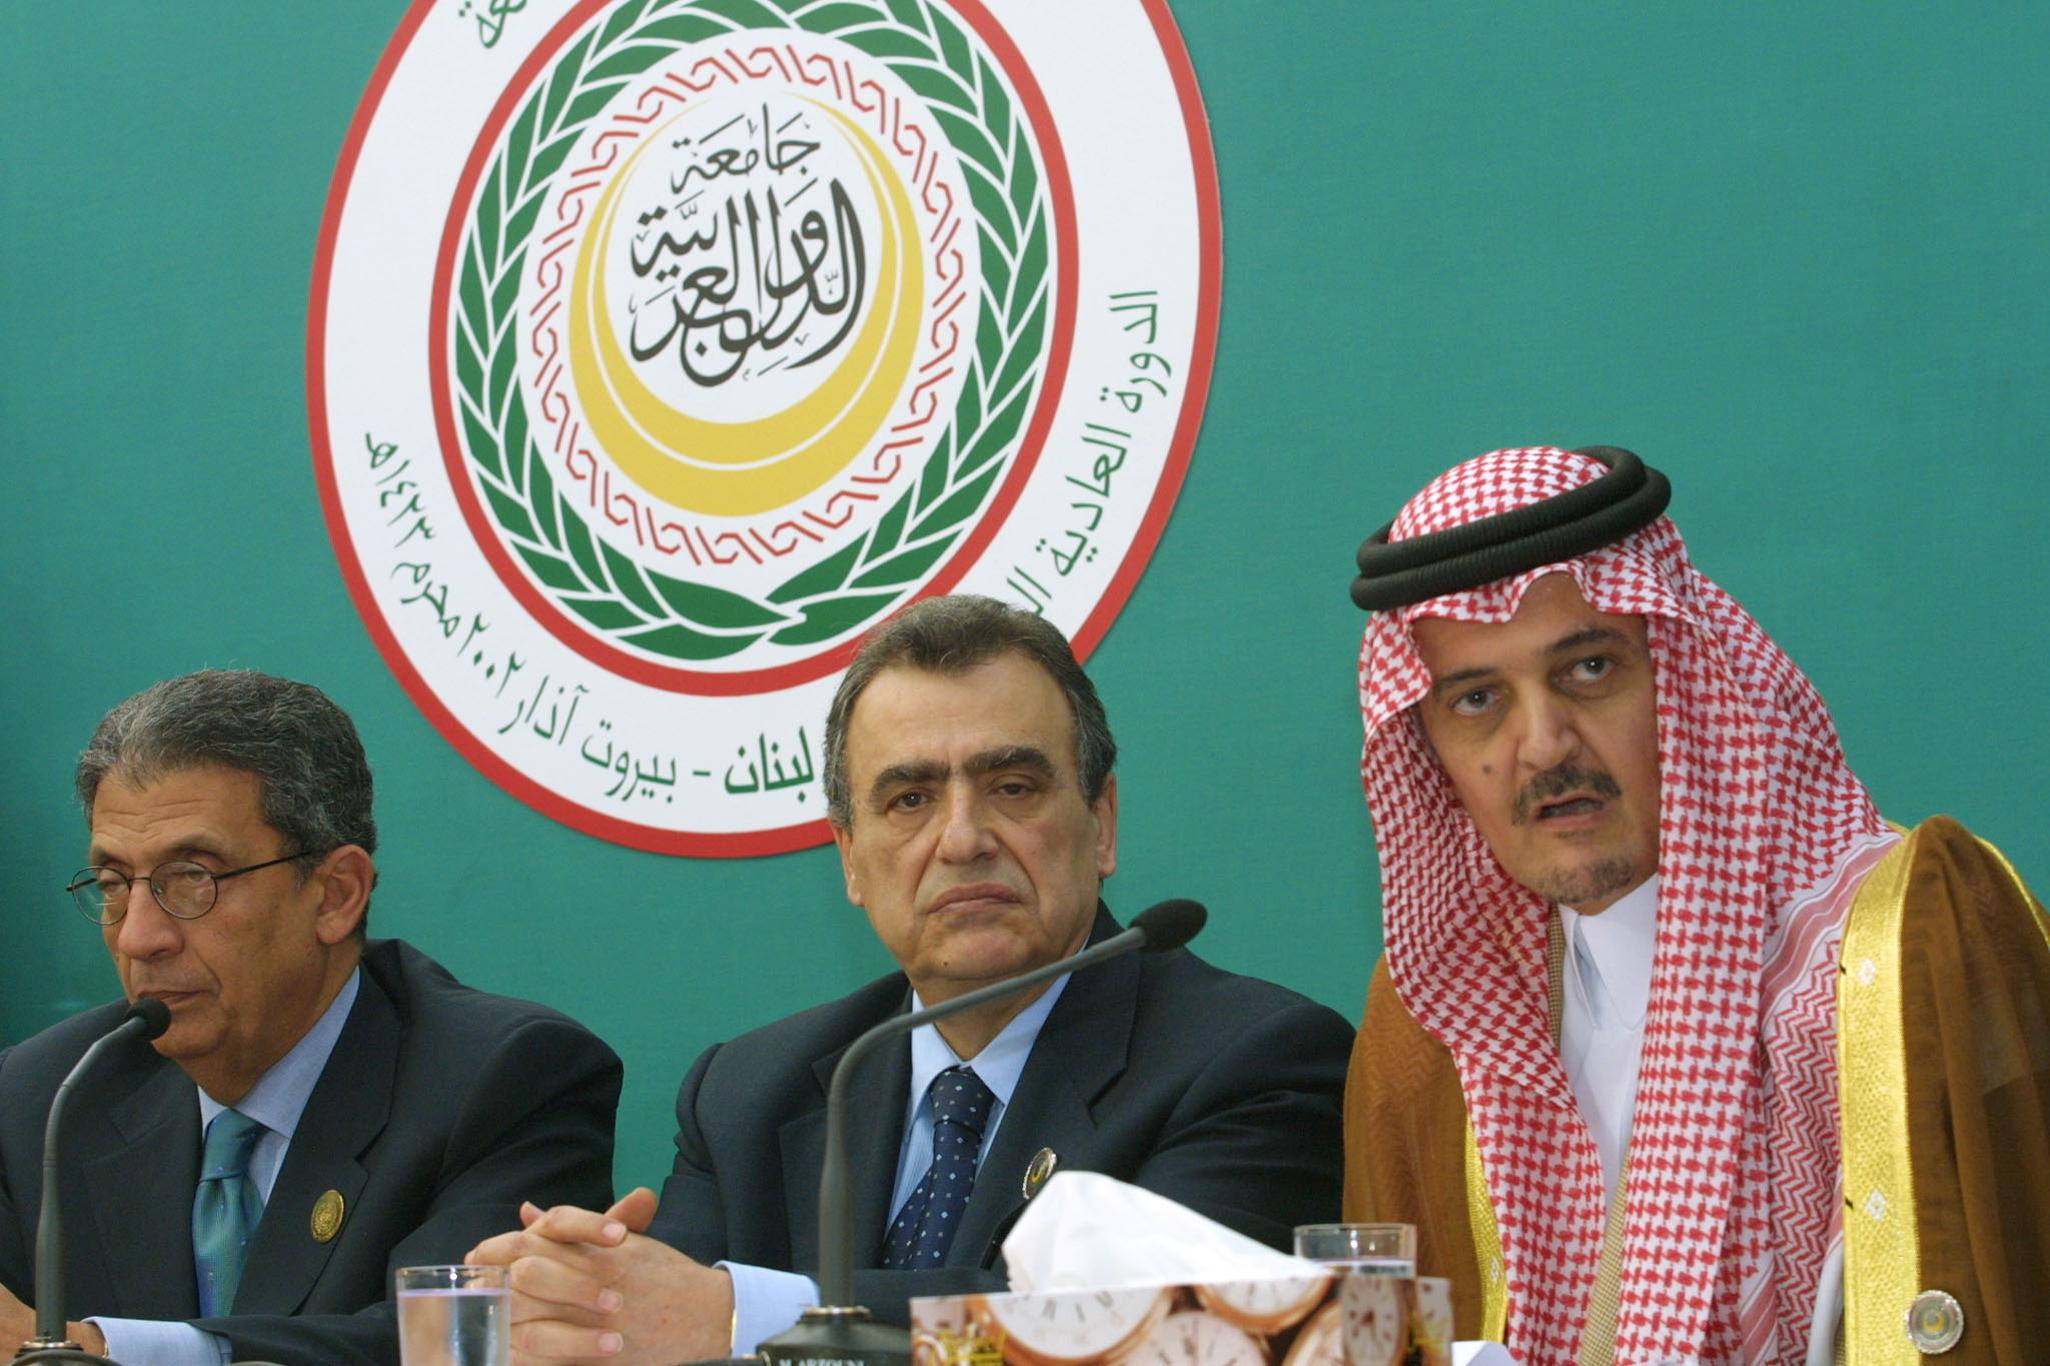 PHOTO: Saudi Arabia's Foreign Minister Prince Saud al-Faisal, far right, shown with Lebanese Foreign Minister Mahmoud Hammud,center, and Secretary General of the Arab League Amr Mussa, March 28, 2002, in Beirut, Lebanon. 